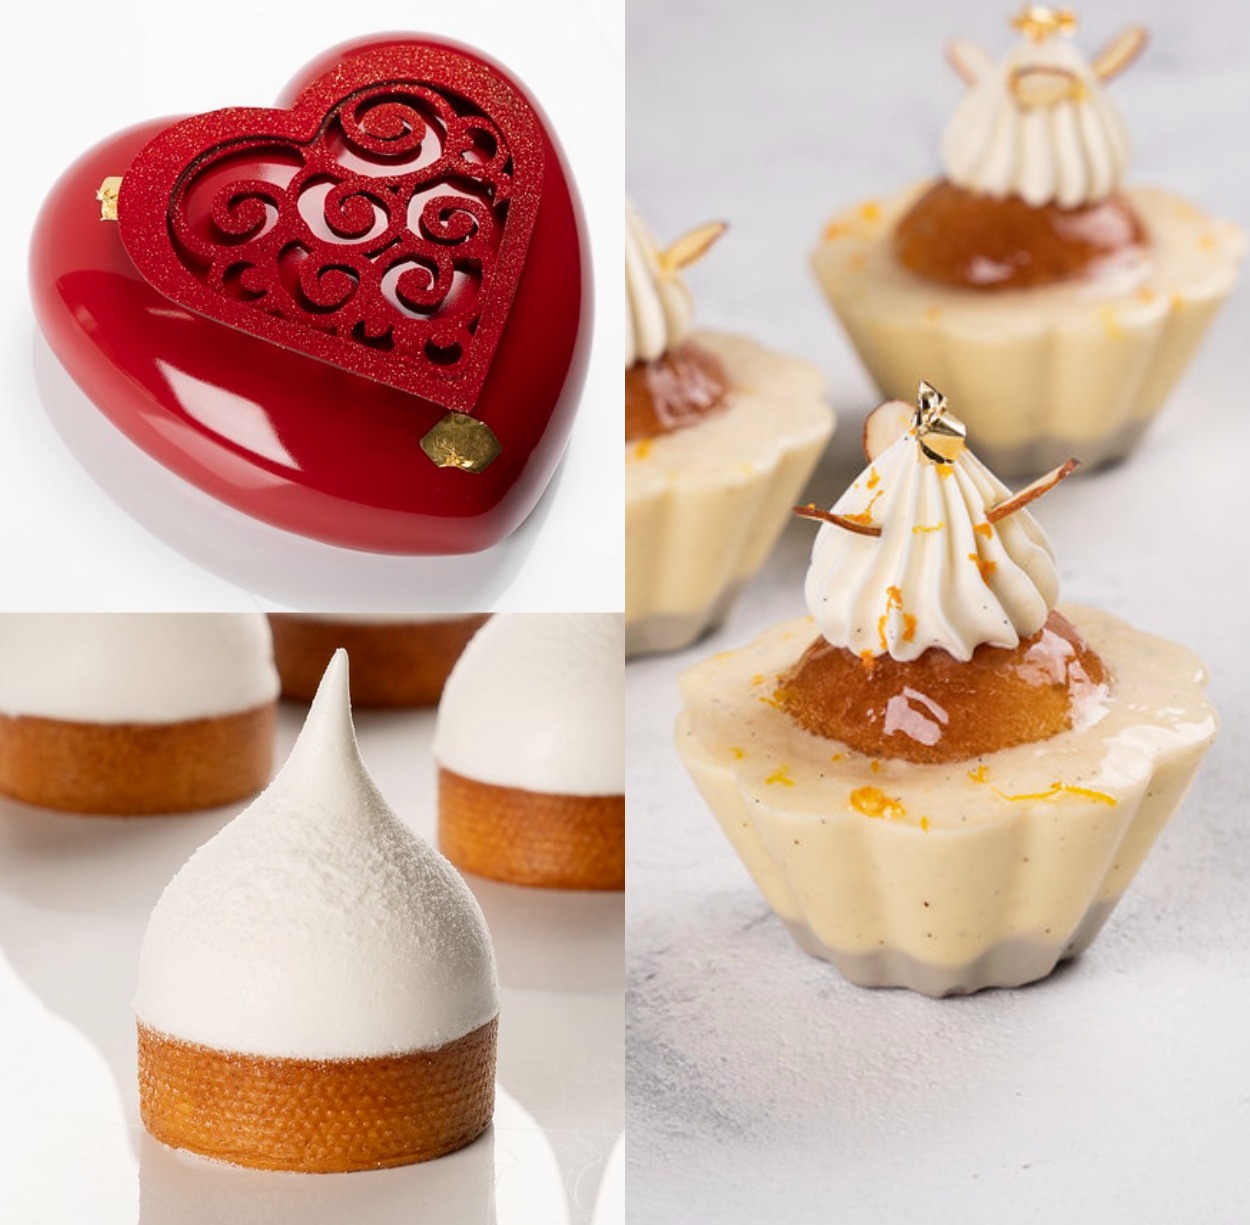 Signature Desserts by Gregory Doyen